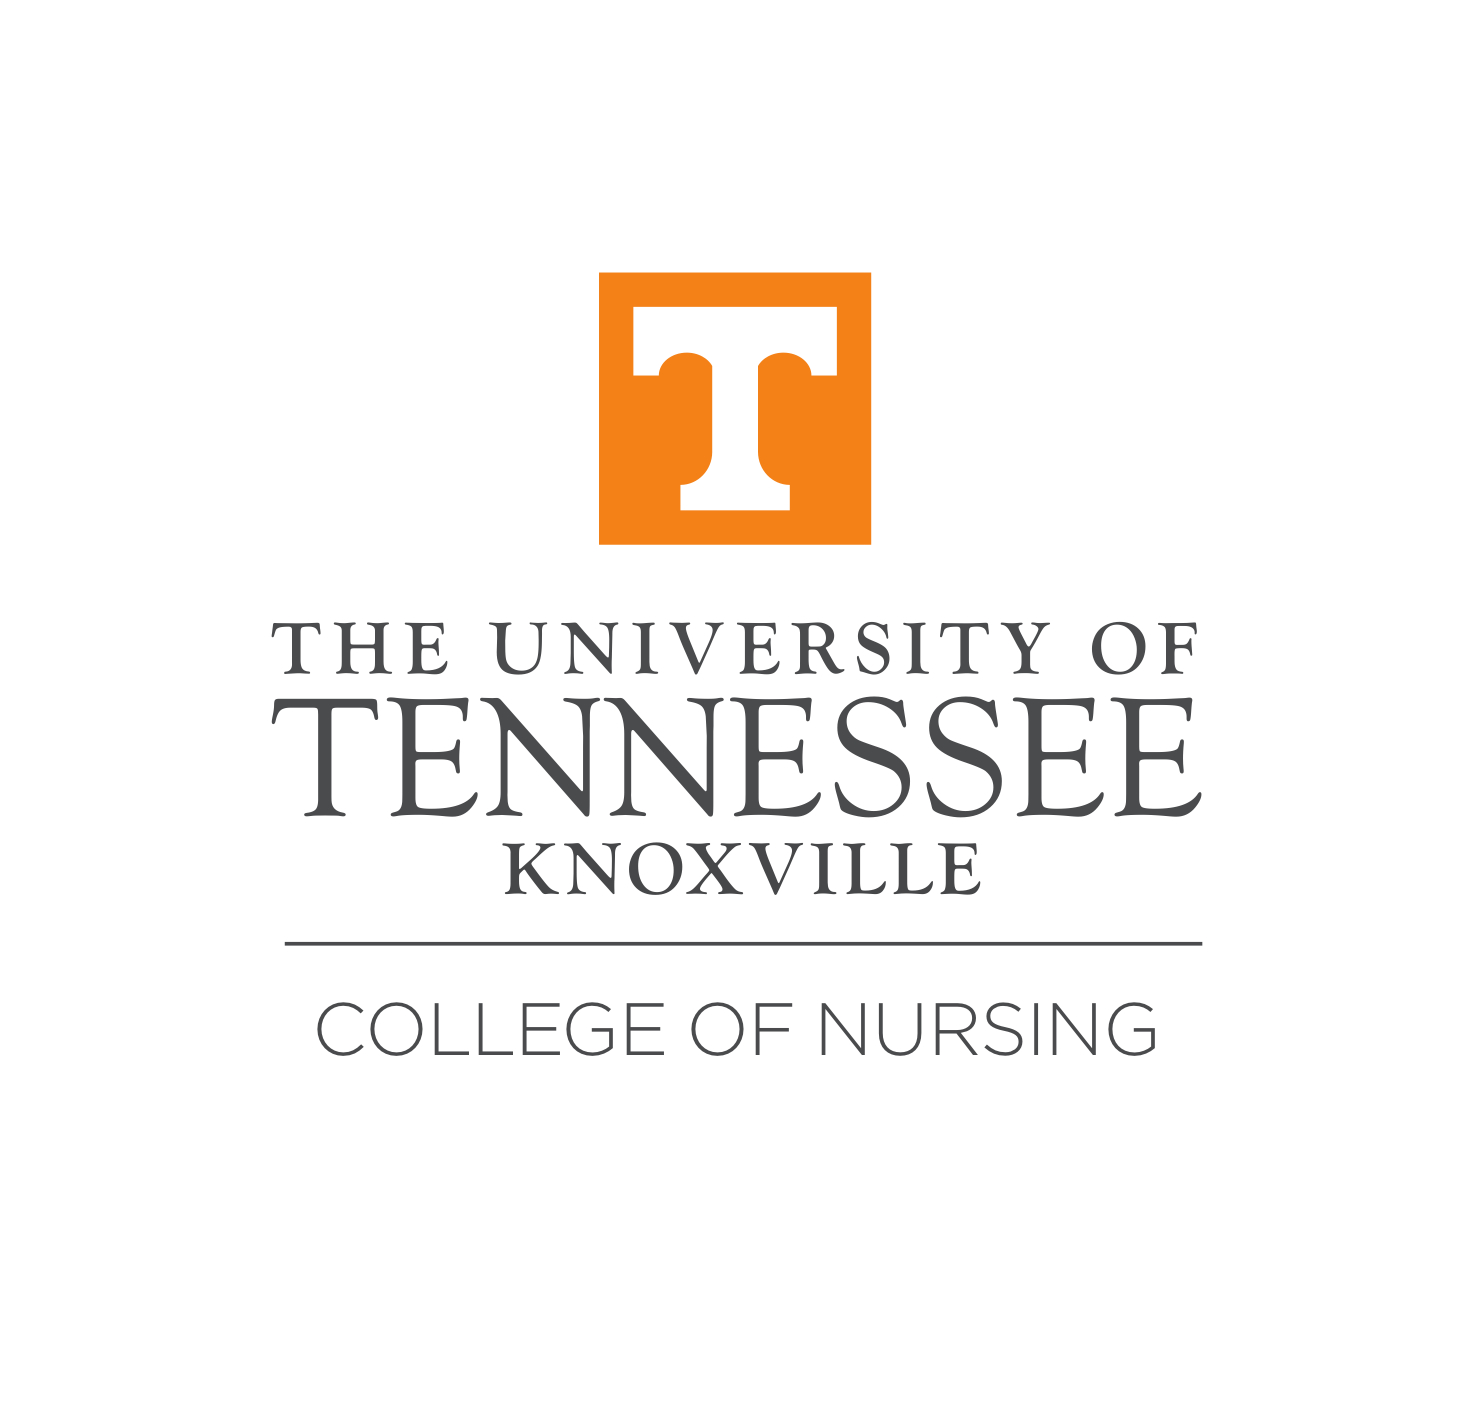 Showcase Image for The University of Tennessee, Knoxville College of Nursing Graduate Programs